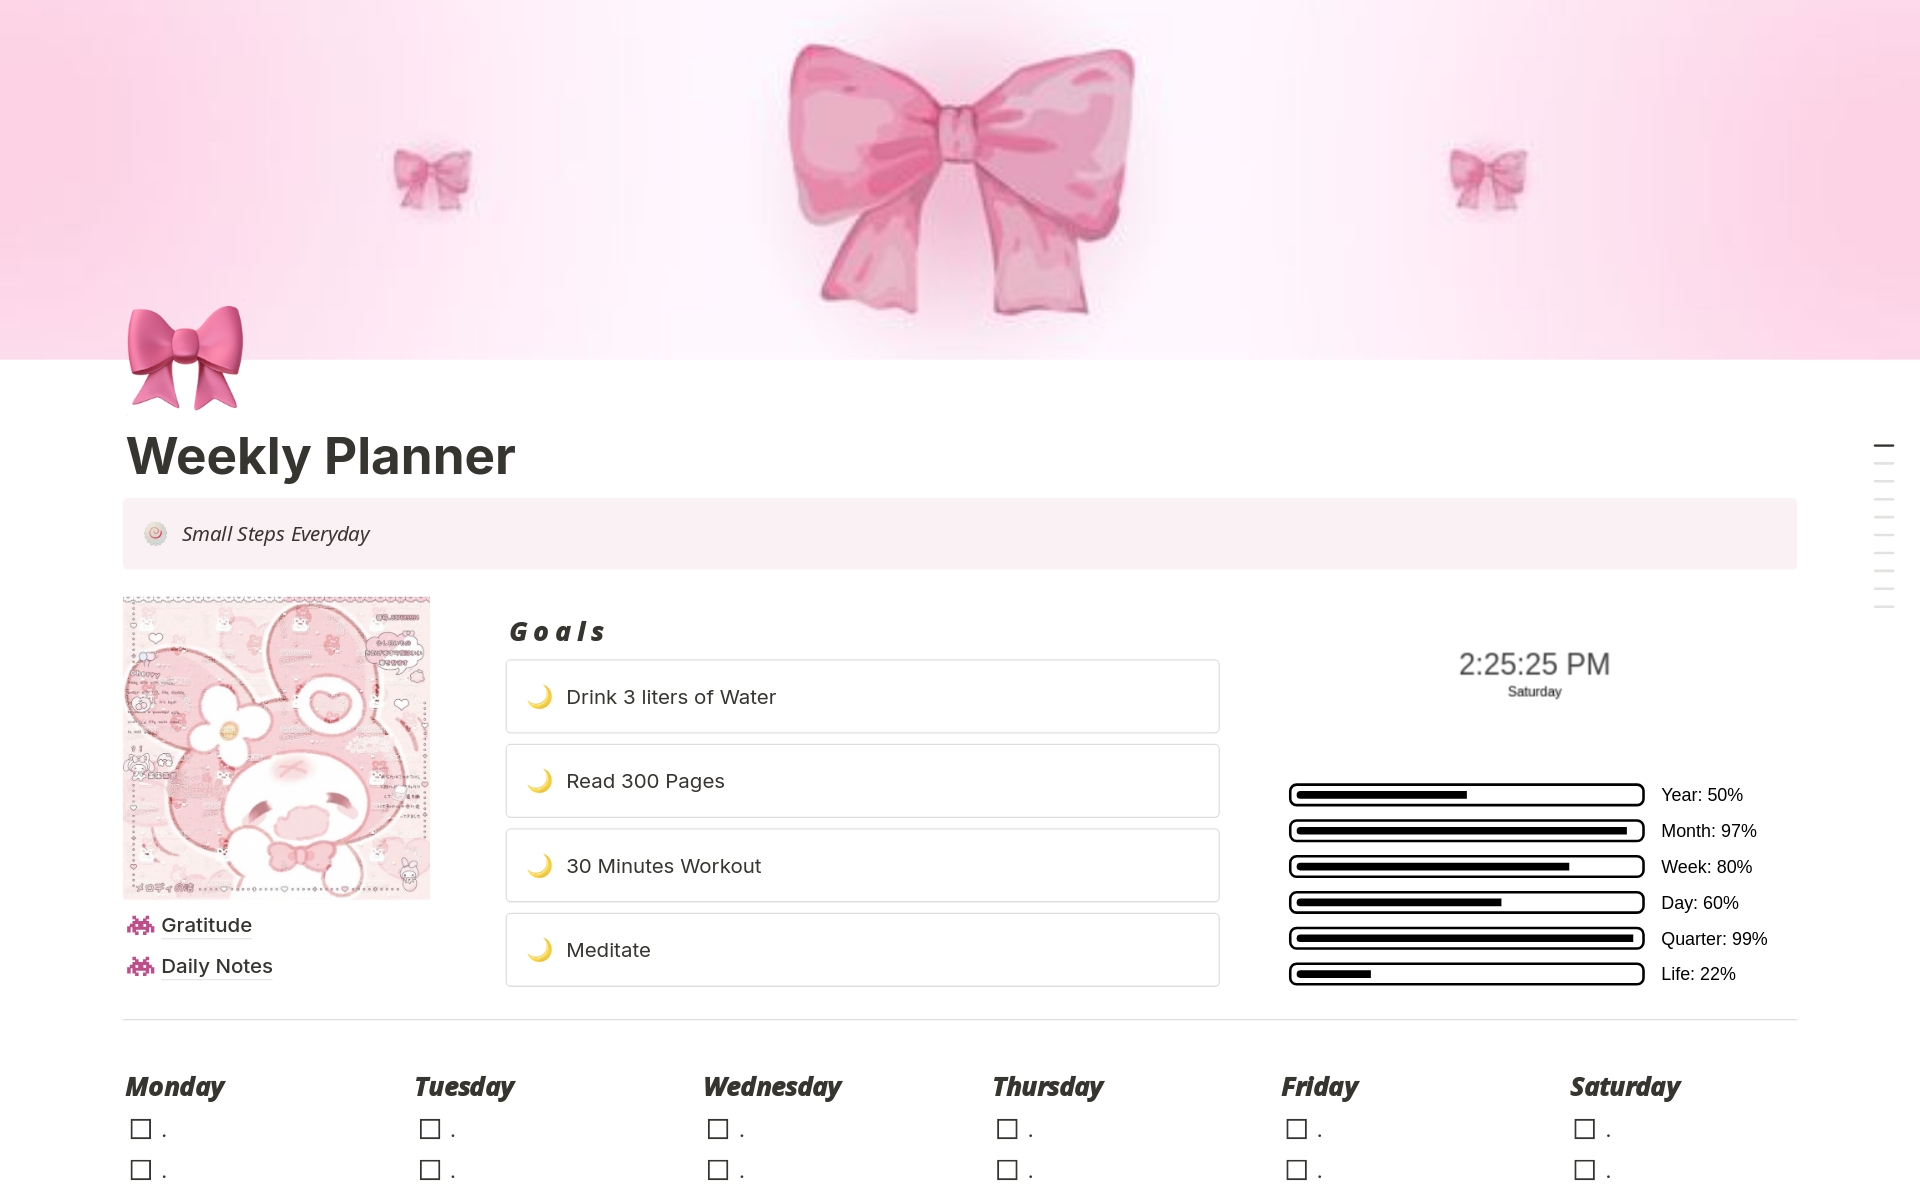 Notion Weekly Planner
Organize Your Week, Achieve Your Goals!